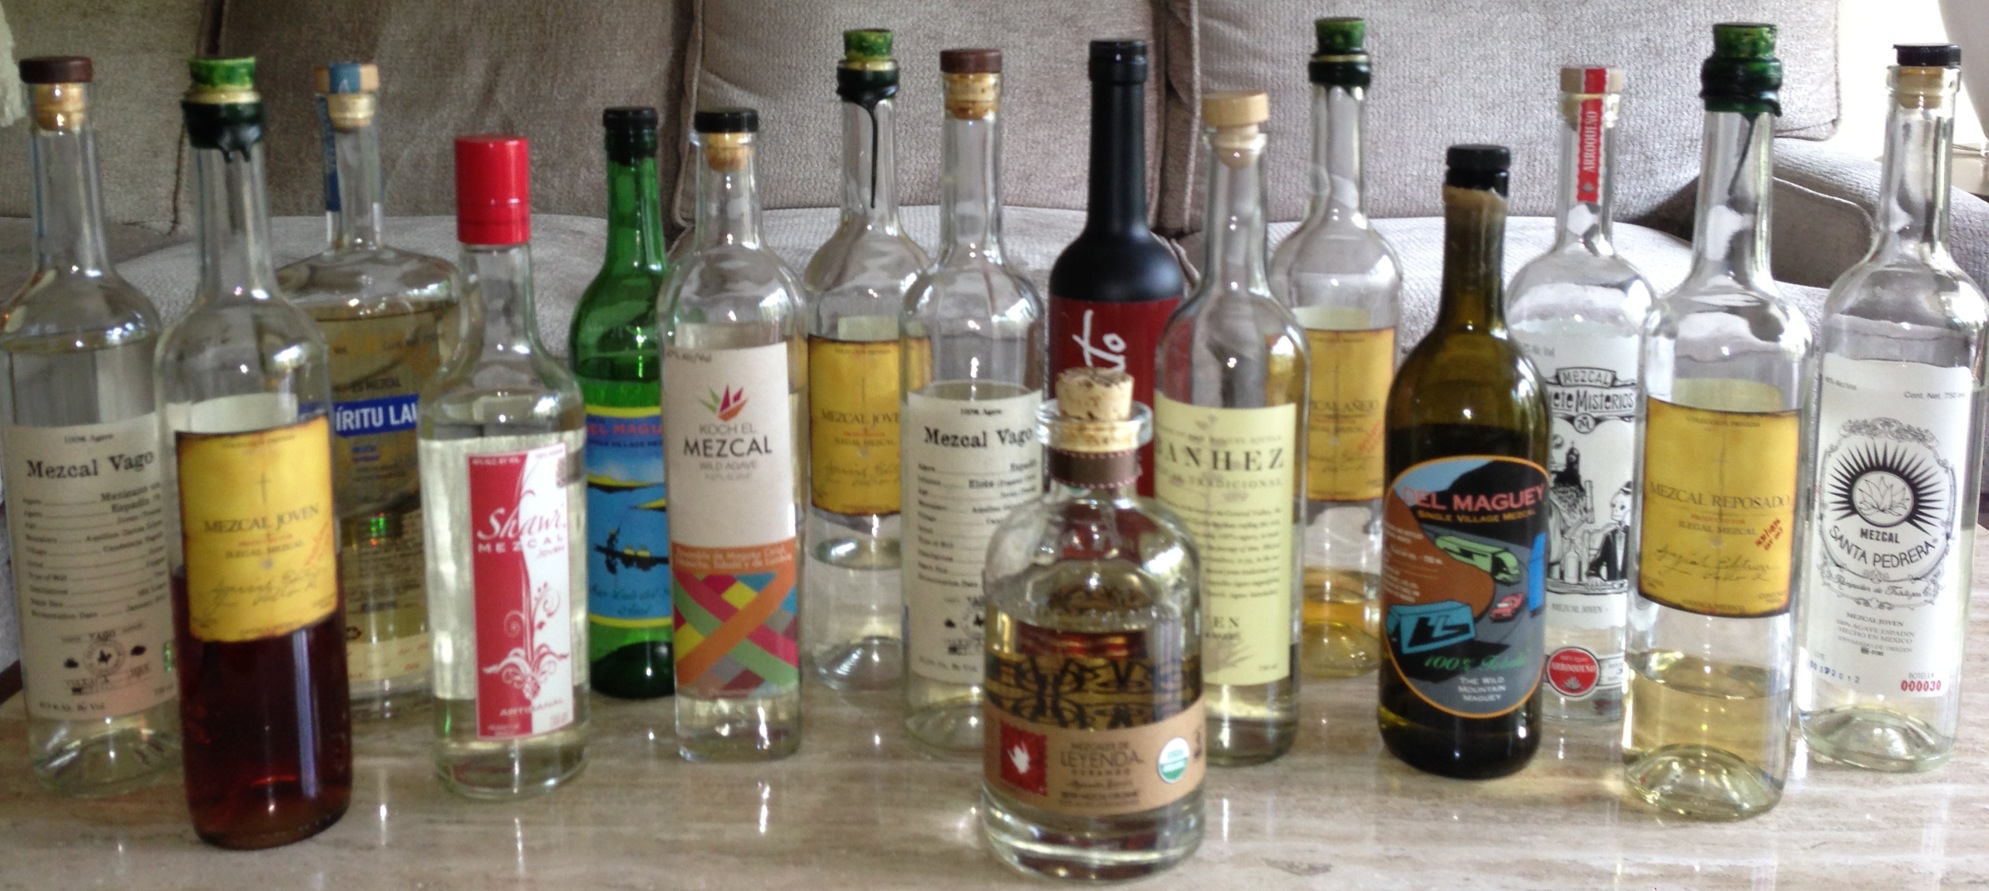 The Featured Bottles